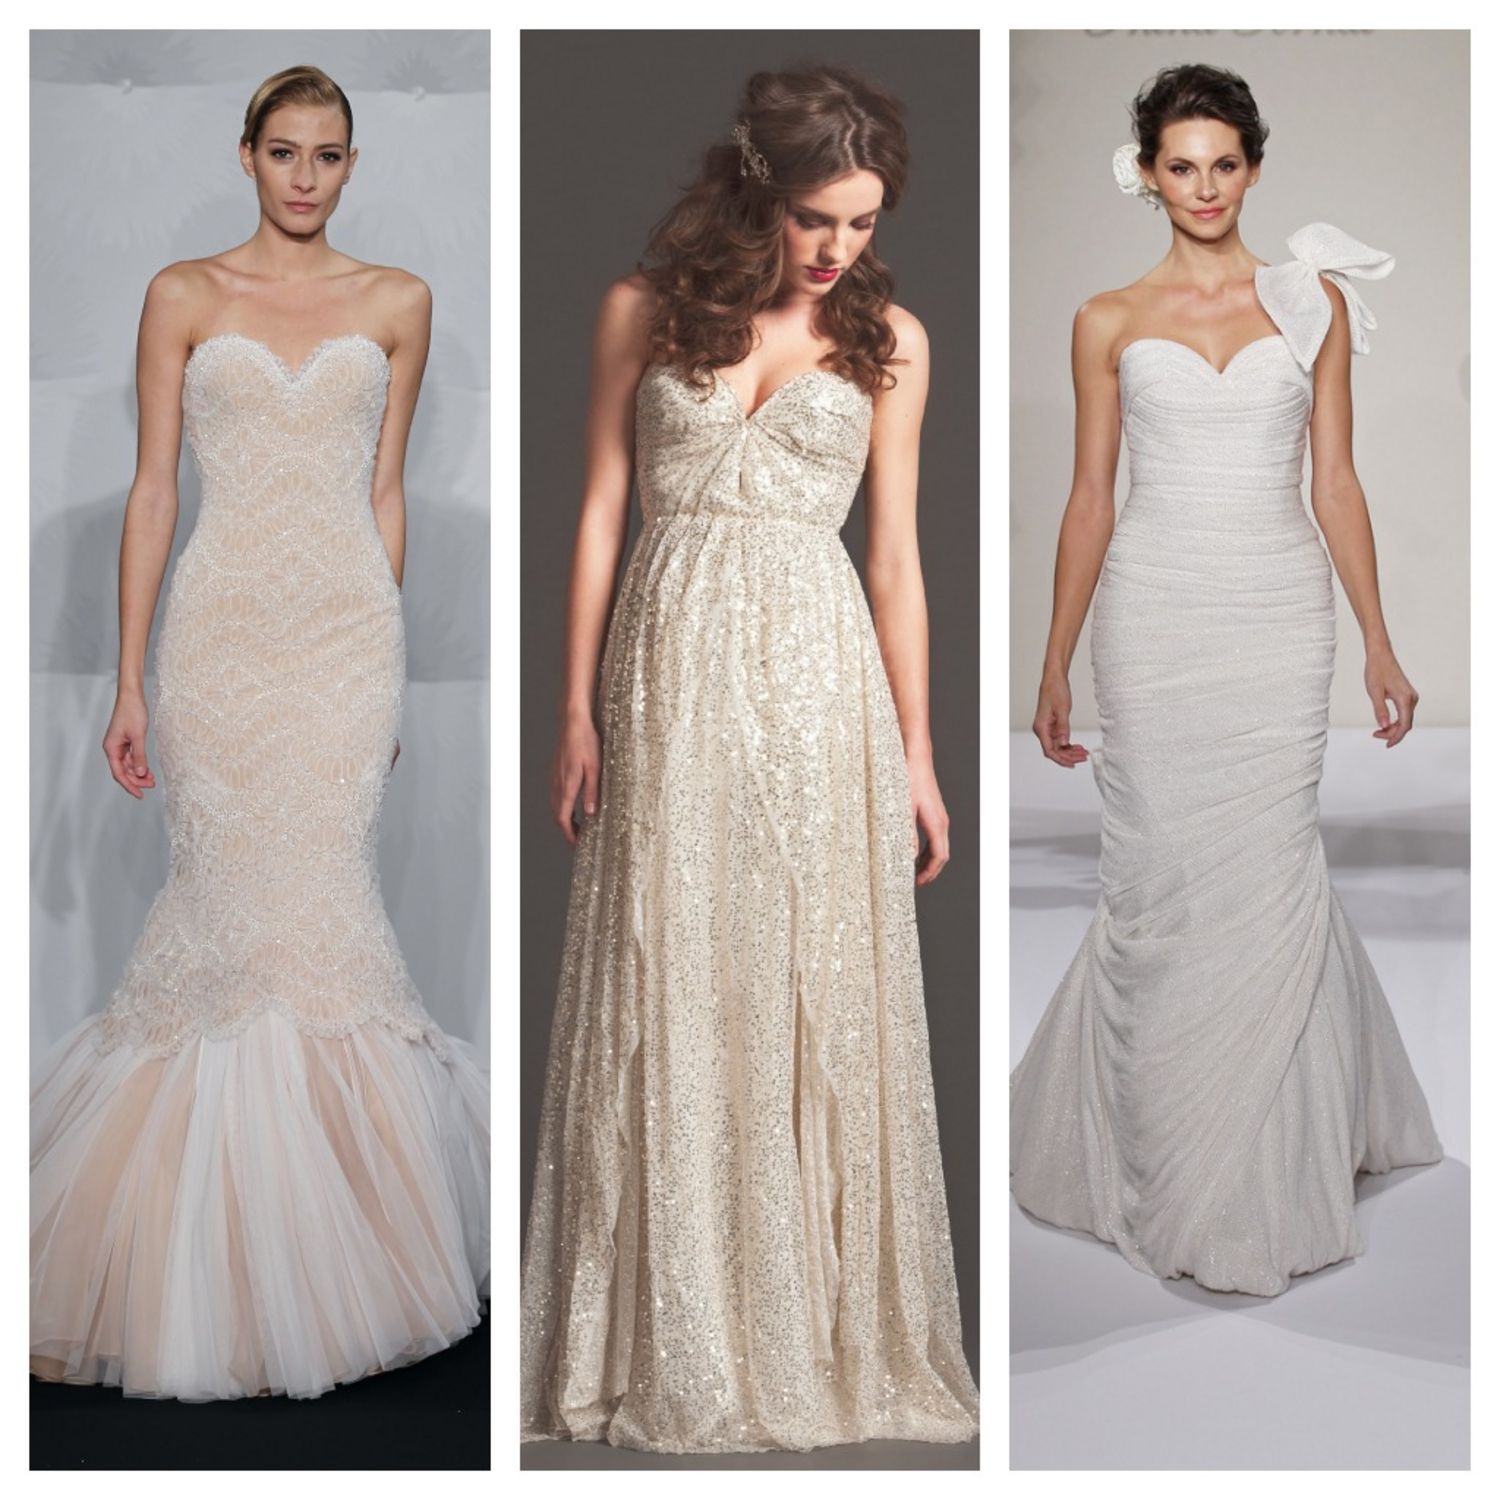 Top 5 Wedding Dresses of the Week: Sparkle